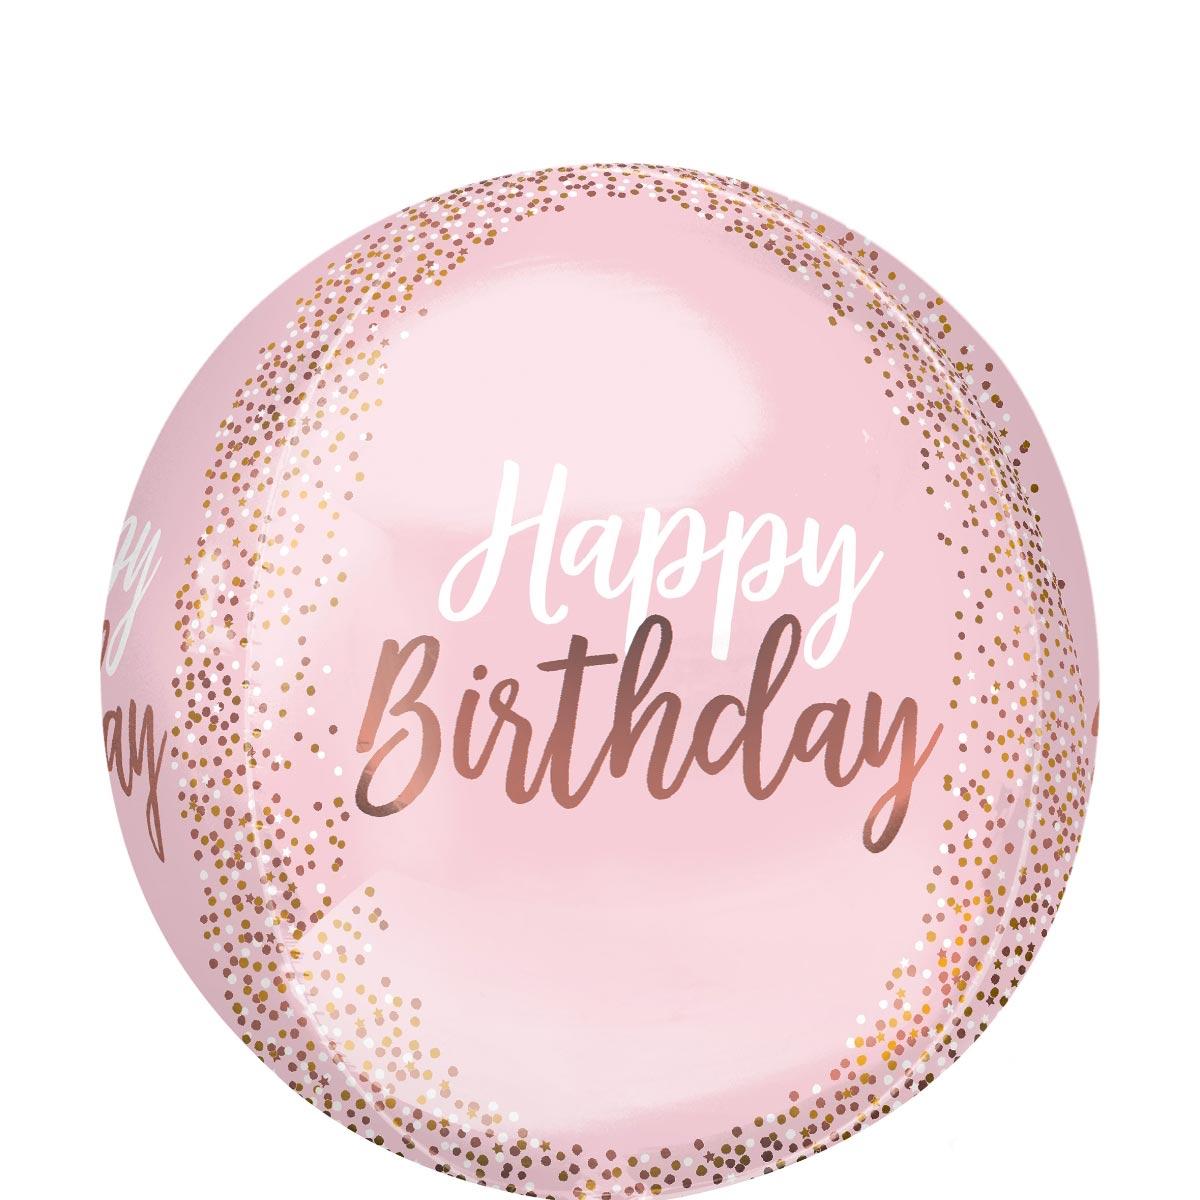 Blush Birthday Orbz Balloon 38x40cm Balloons & Streamers - Party Centre - Party Centre